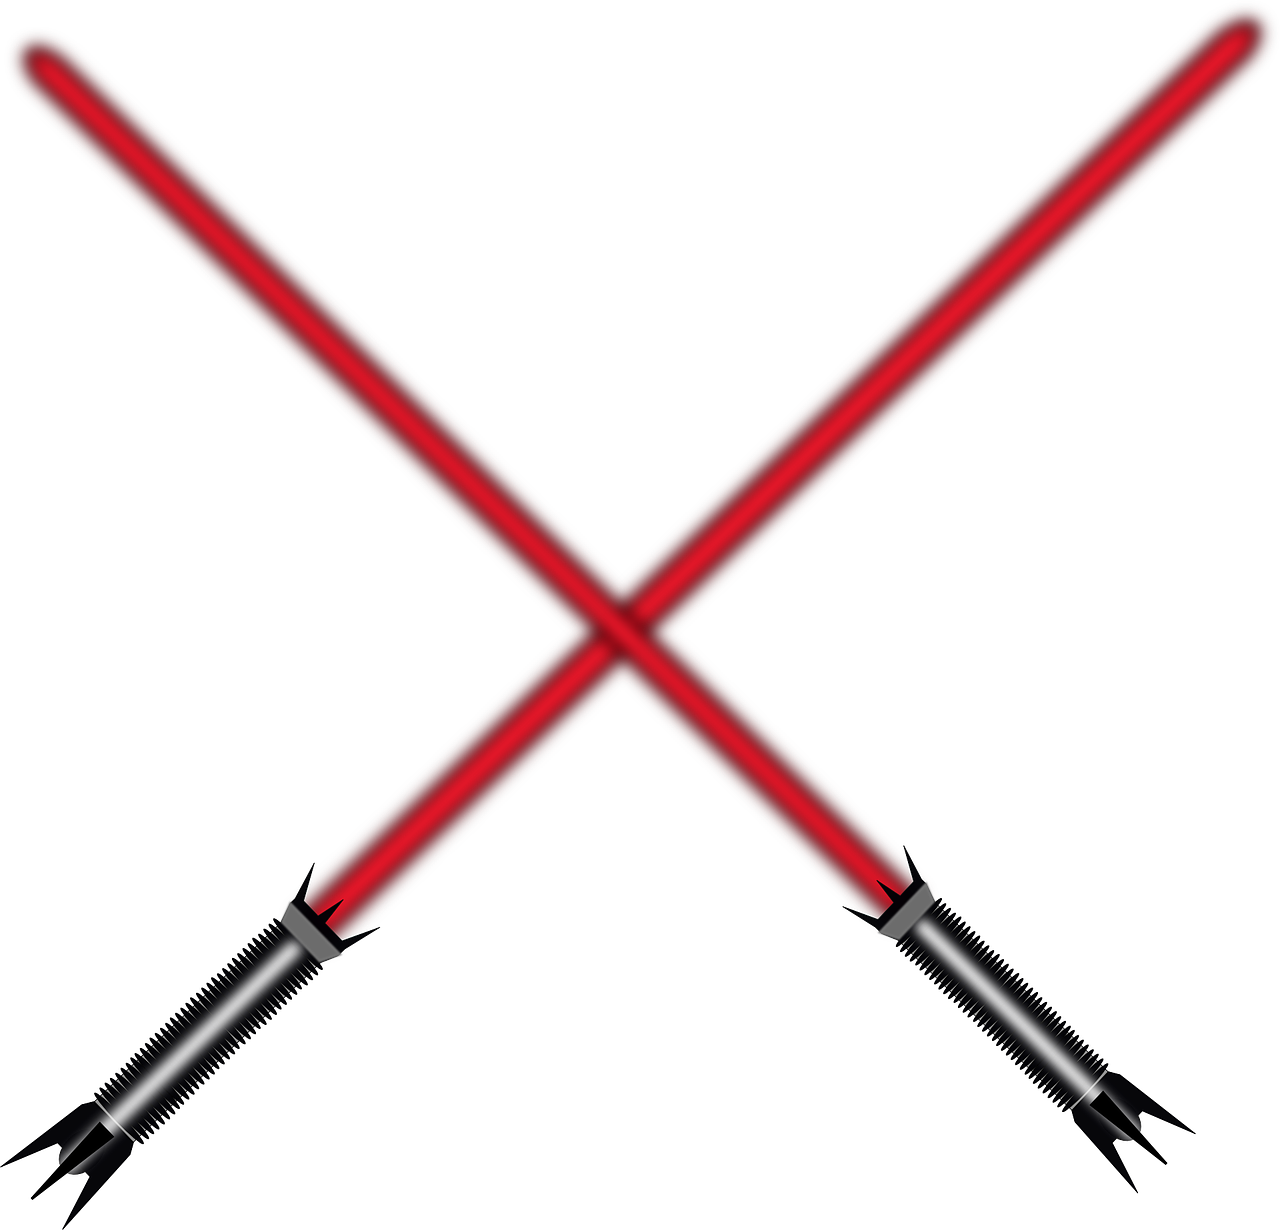 lightsabers swords red free photo